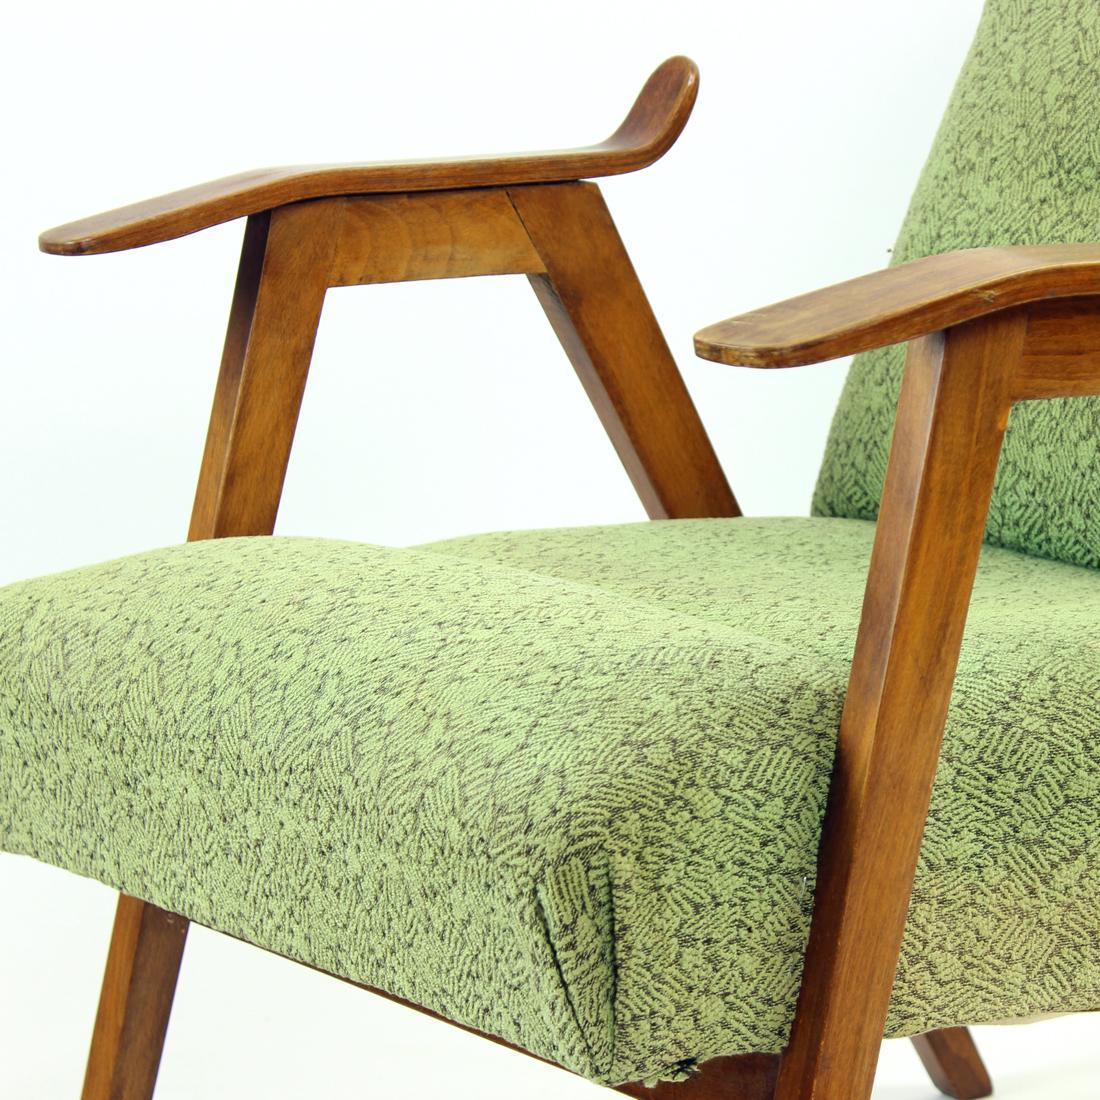 Beautiful mid-century armchair. Produced in 1960s by Mier company in Czechoslovakia. The chair has restored wooden parts which are finished in a natural shade and finish of the oak wood. The seat is upholstered in an original fabric in green shade